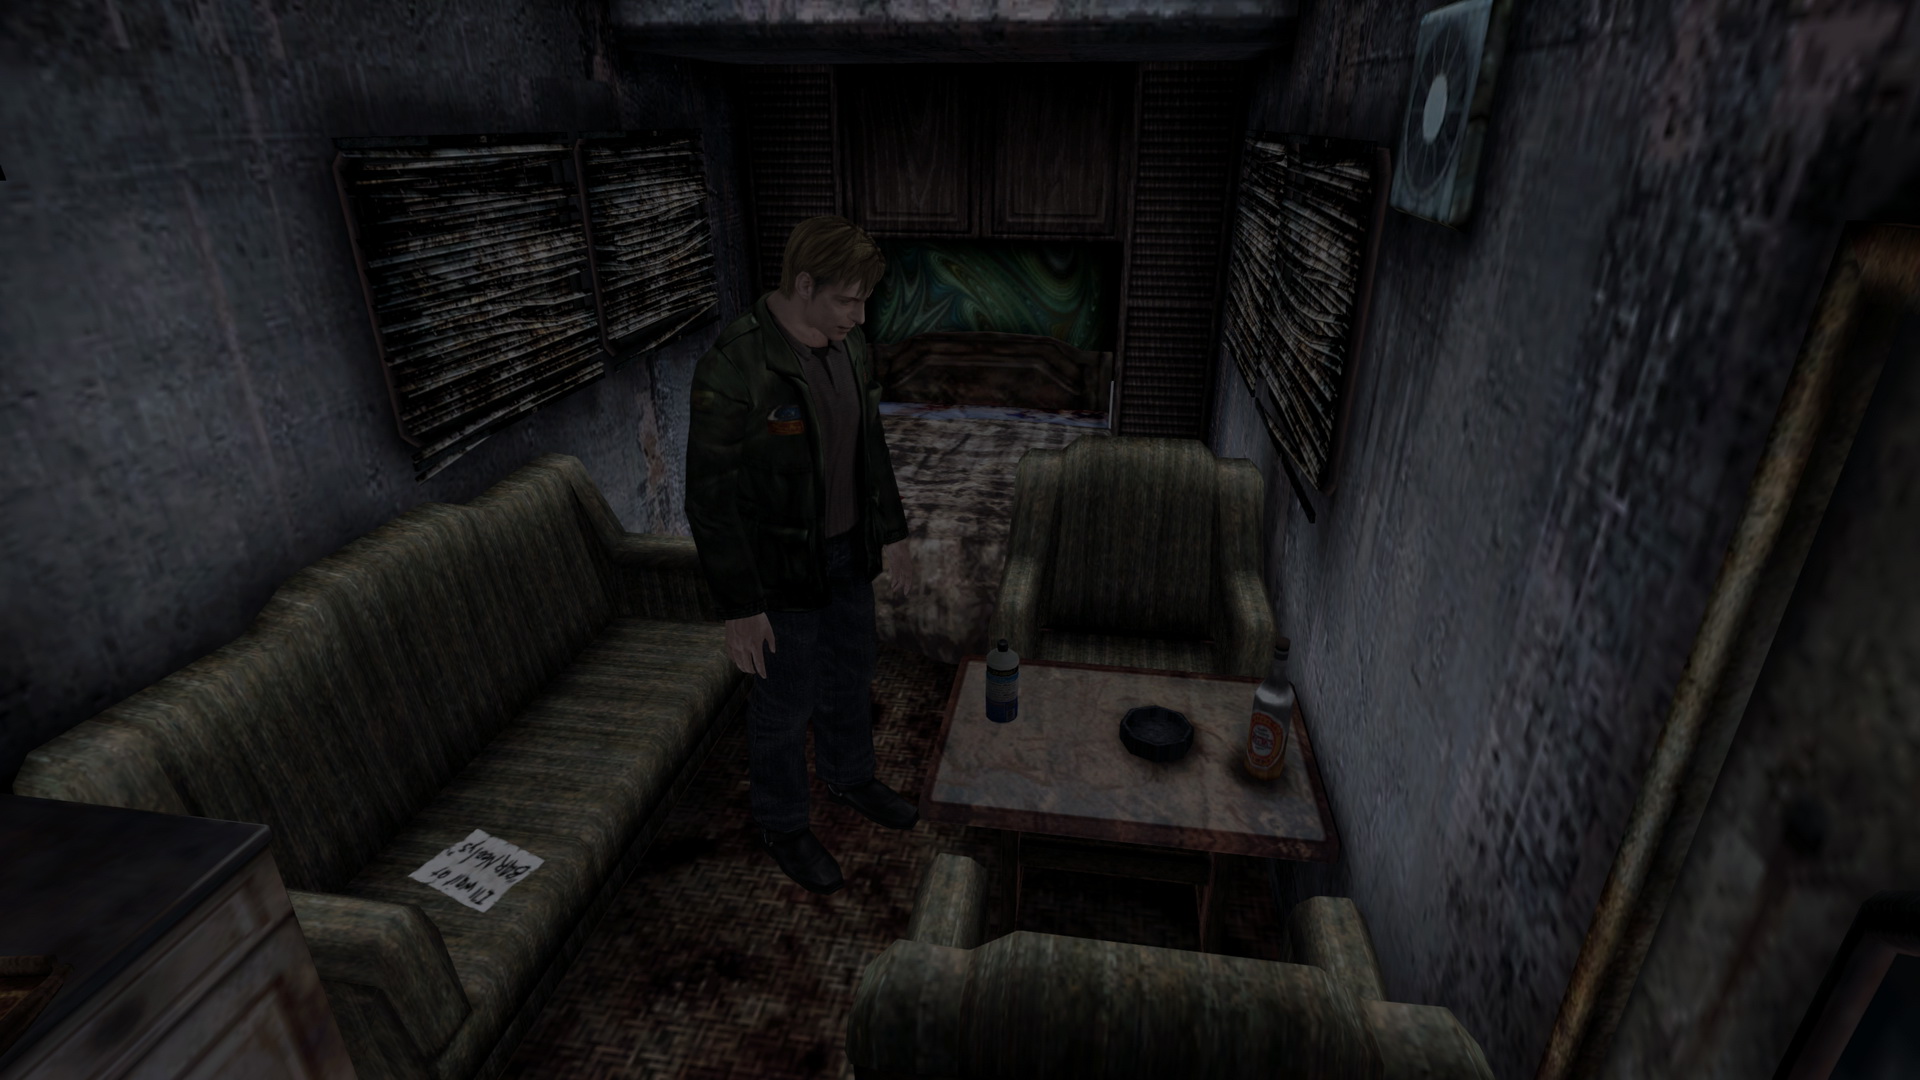 Playing Silent Hill 2 for the first time. Any pointers for a new